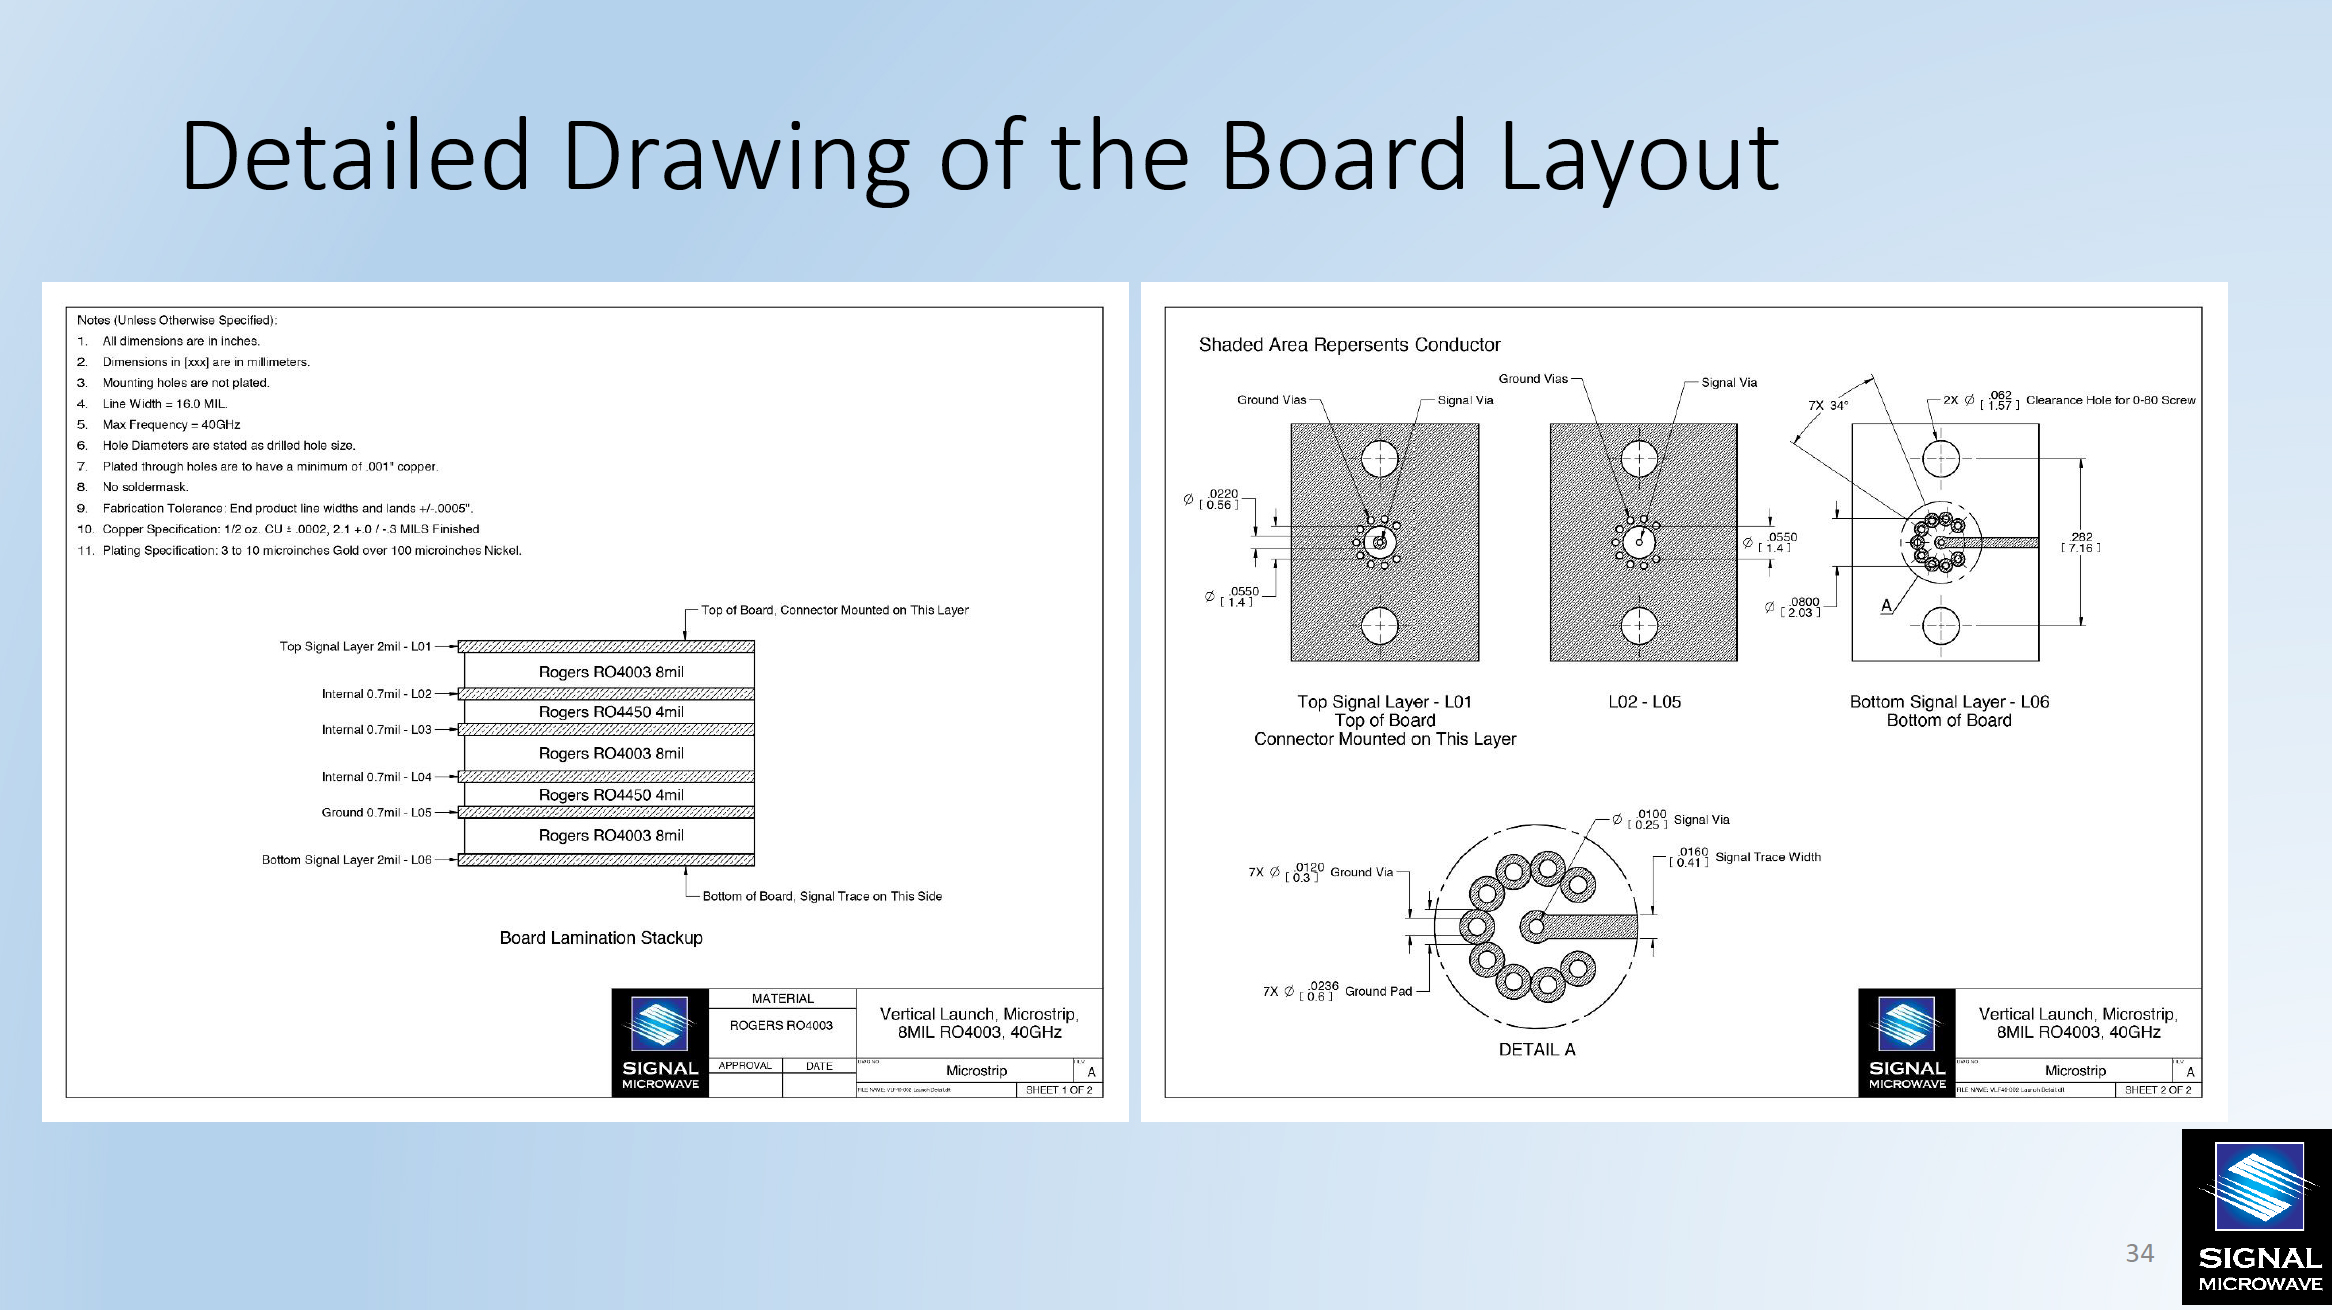 Detailed Drawing of the Board Layout